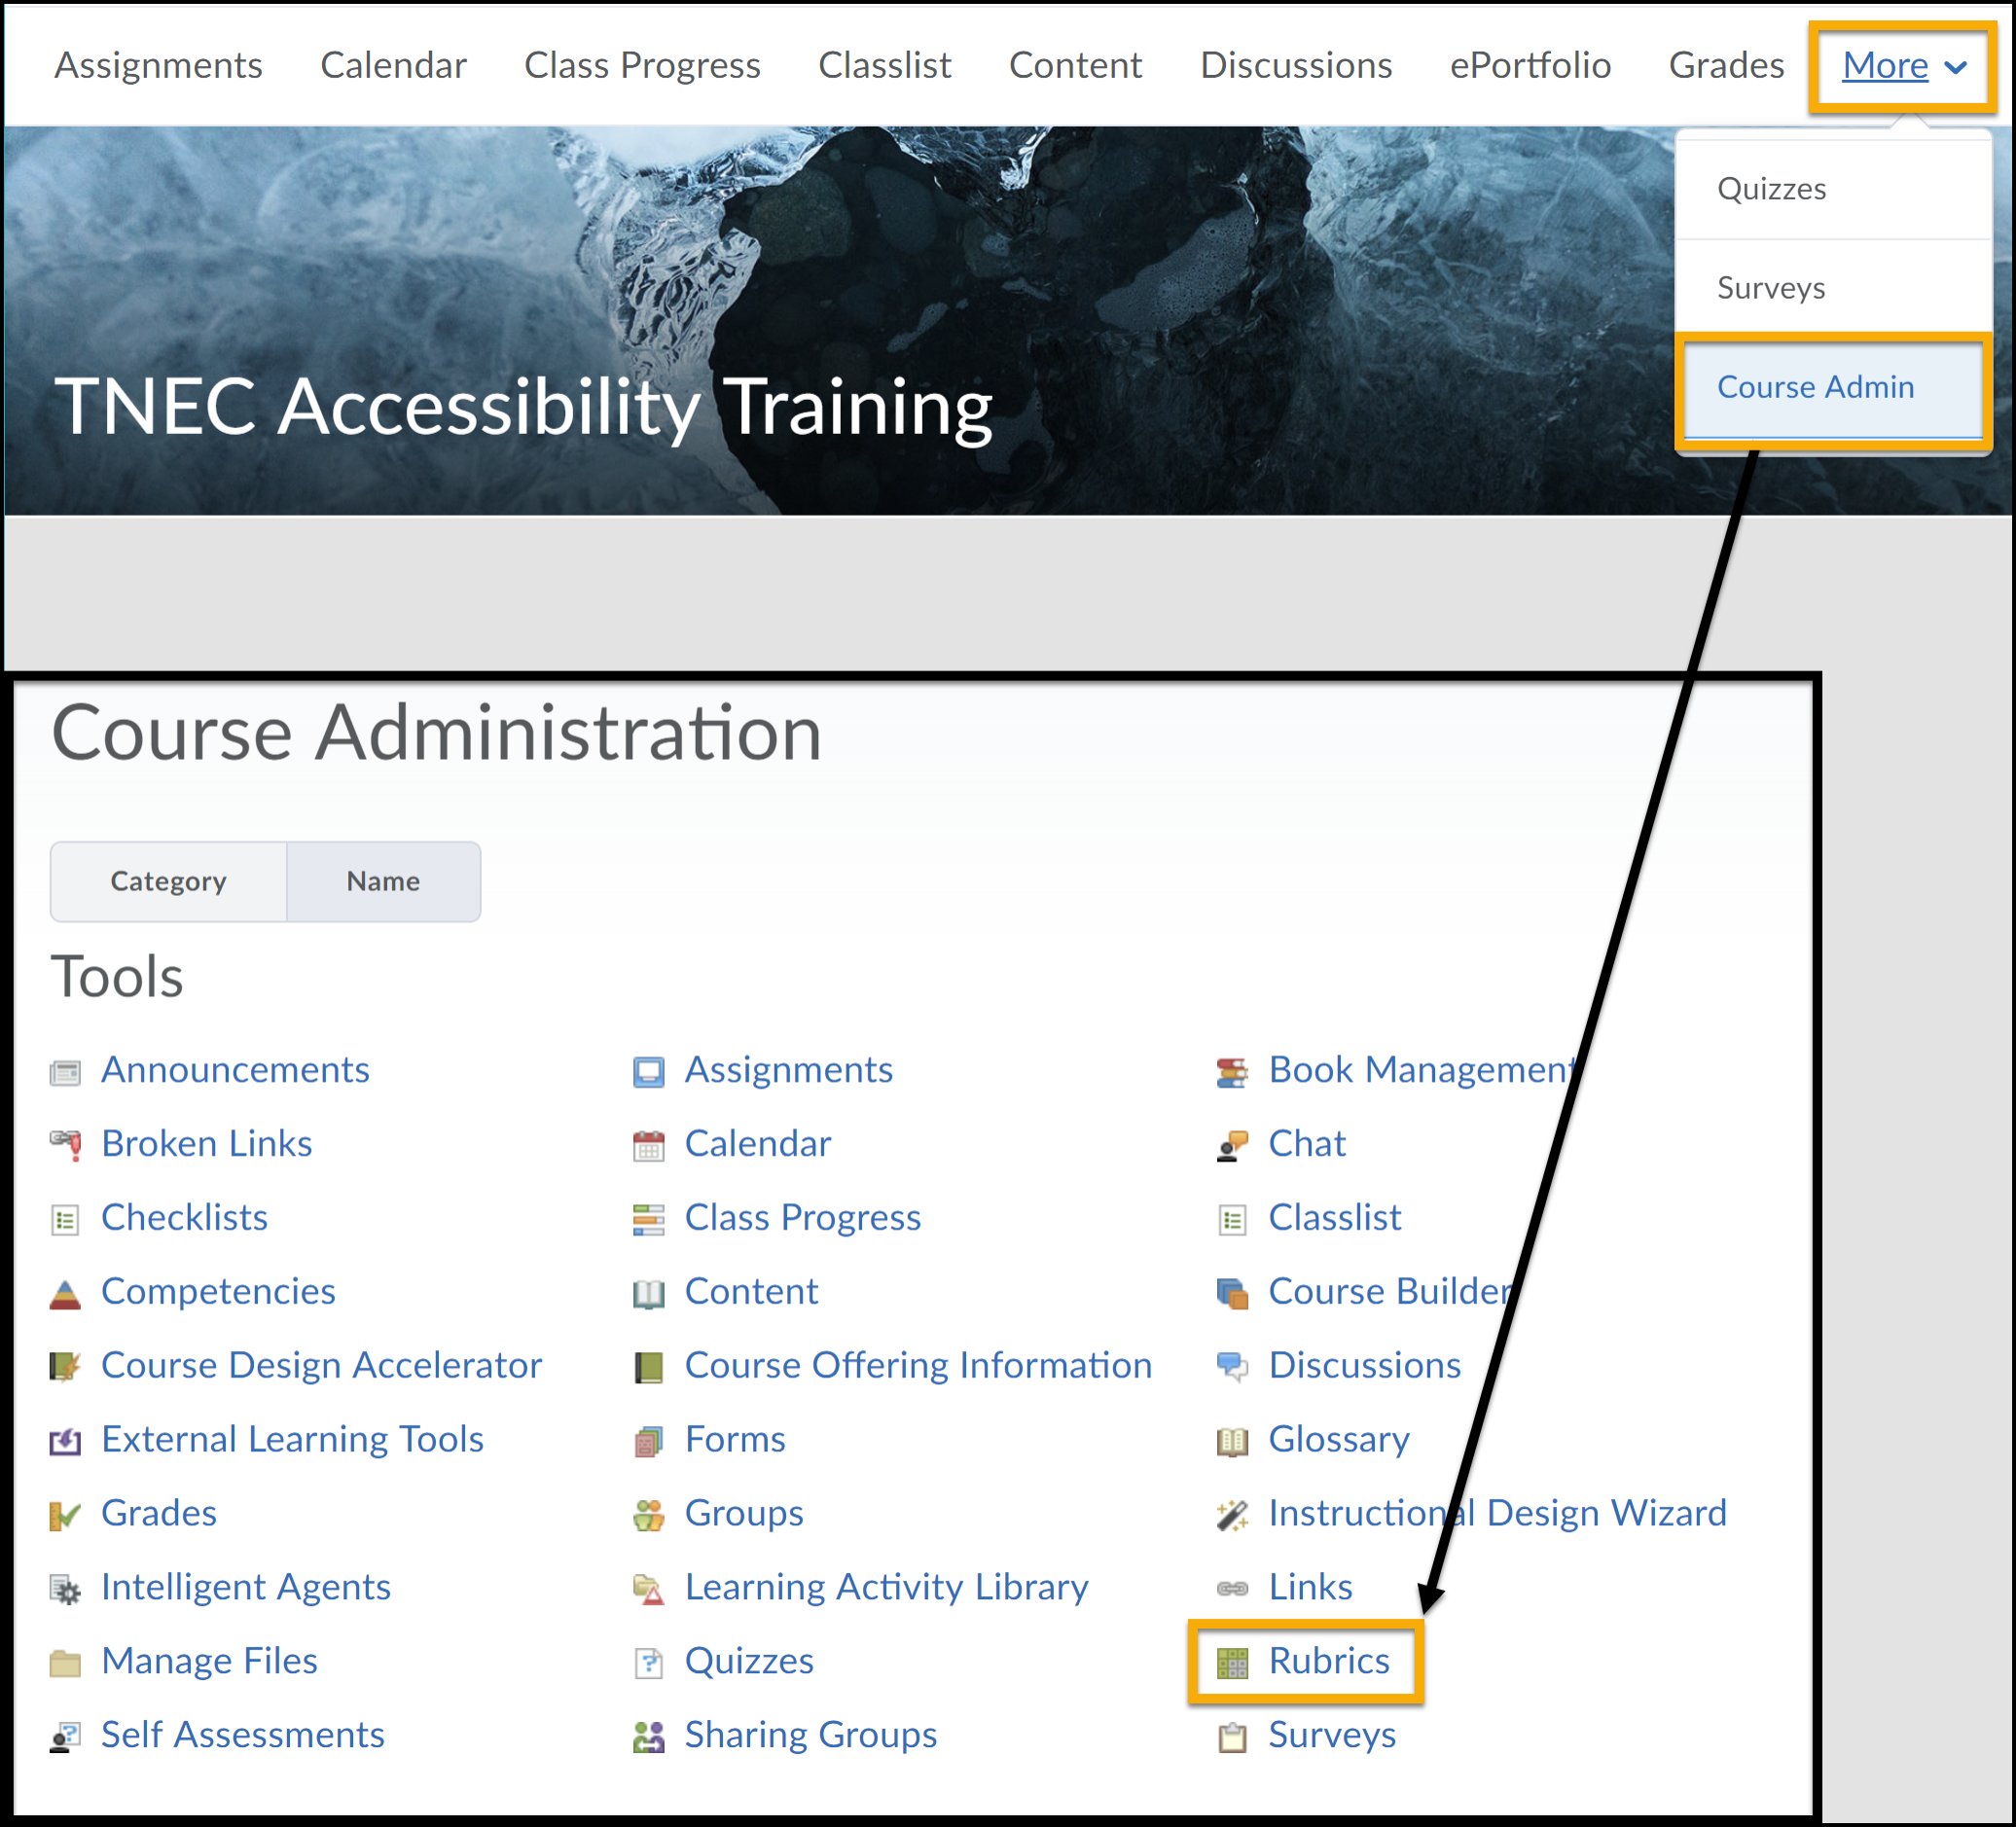 More and Course Admin highlighted on the navbar. Arrow pointing toward Course Admin page. Rubrics highlighted.